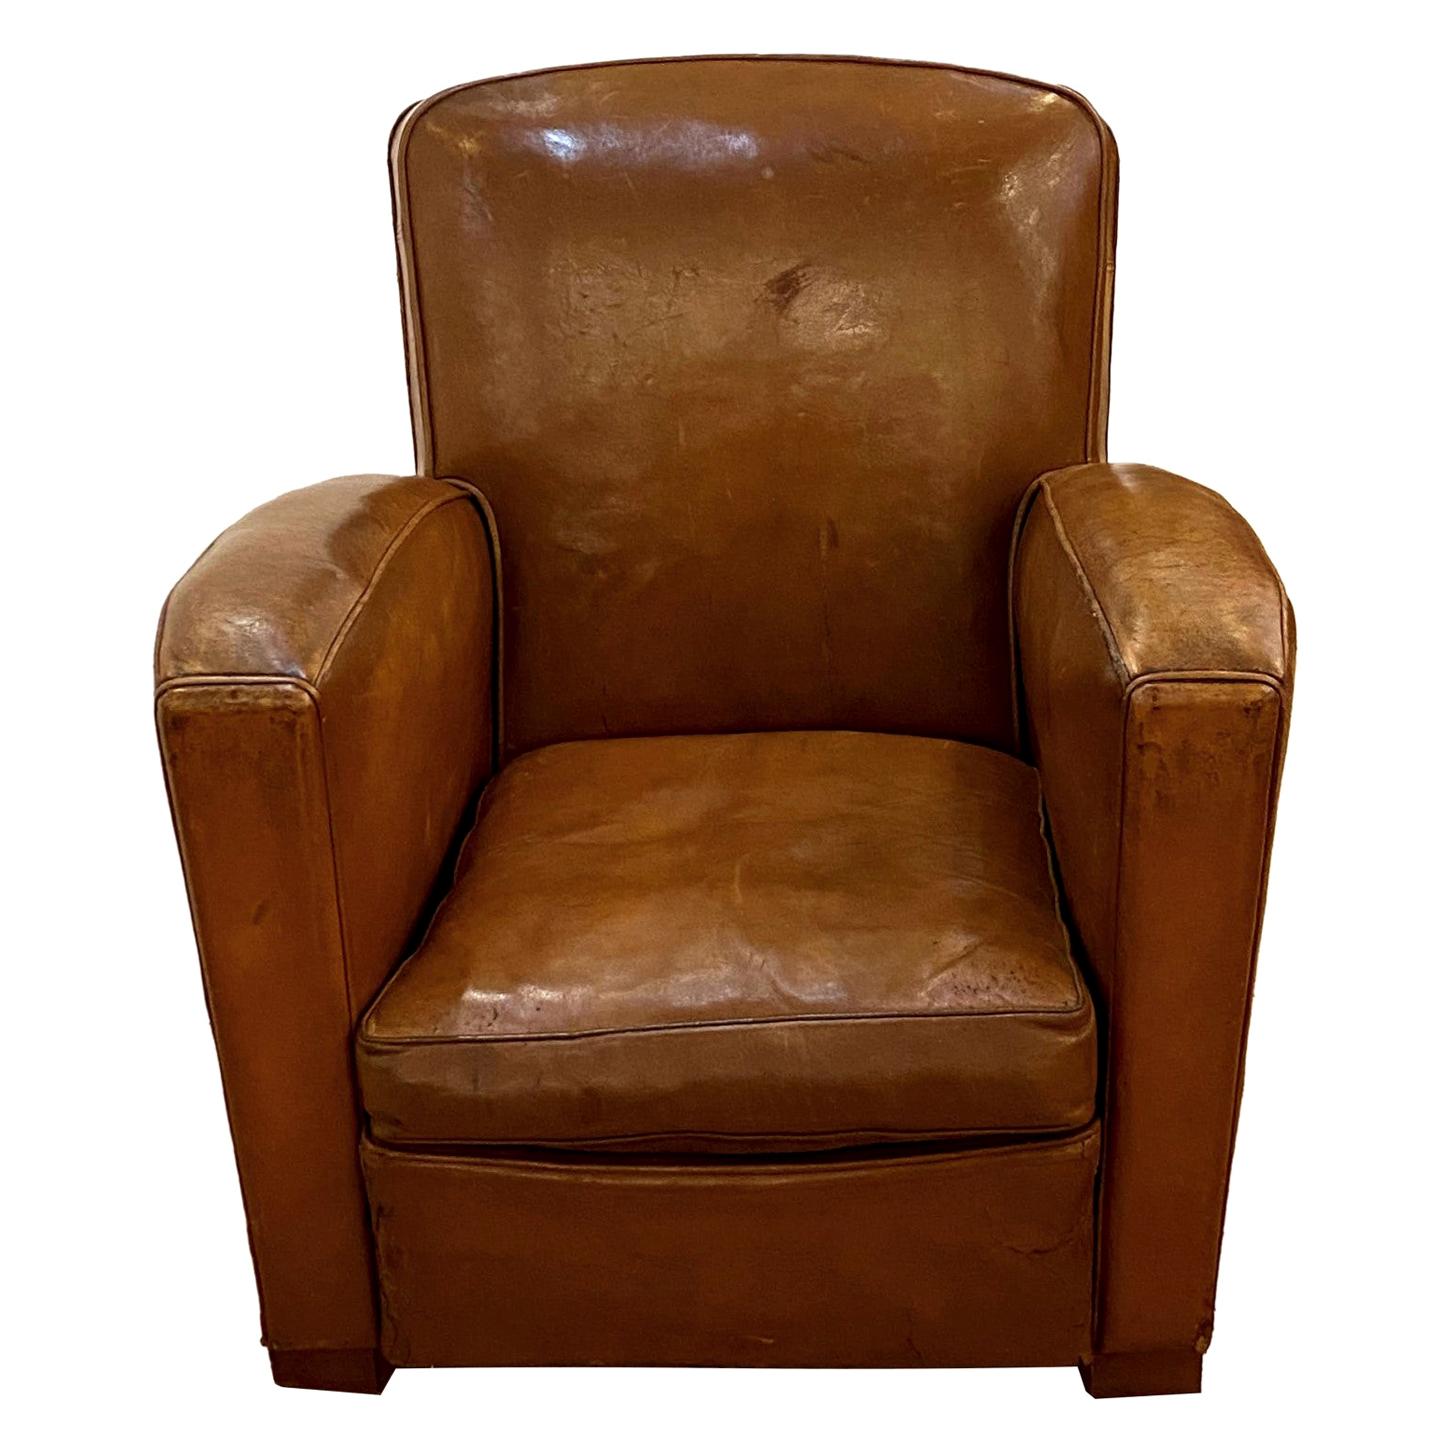 1930s Art Deco Brown Leather French Refurbished Club Chair